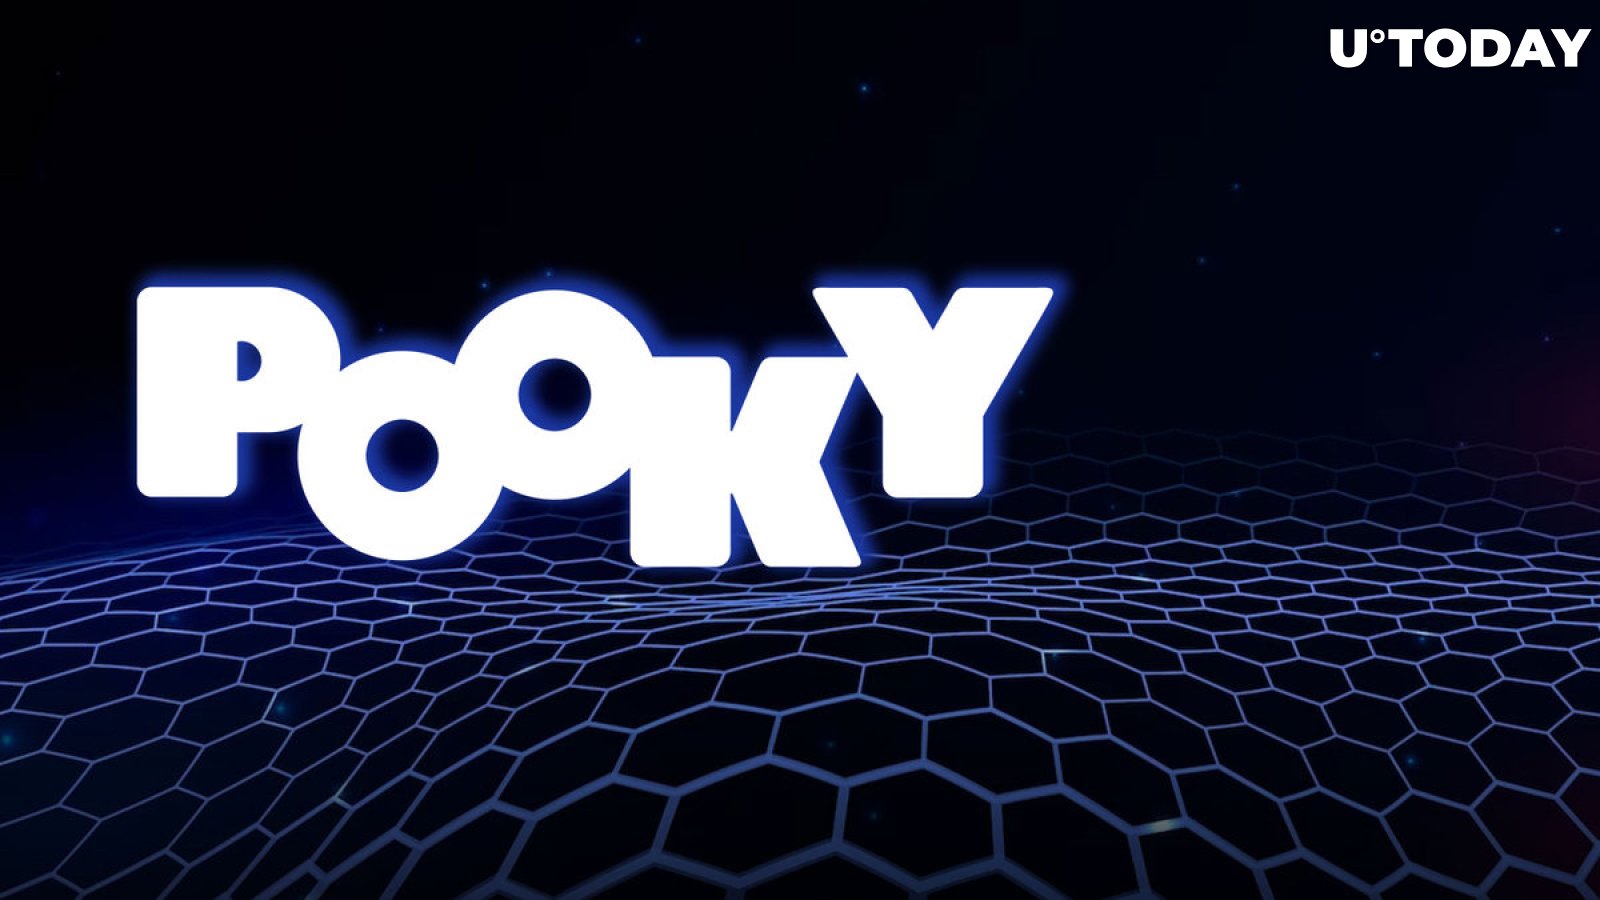 Pooky App Launches Play-to-Earn Game in Mainnet